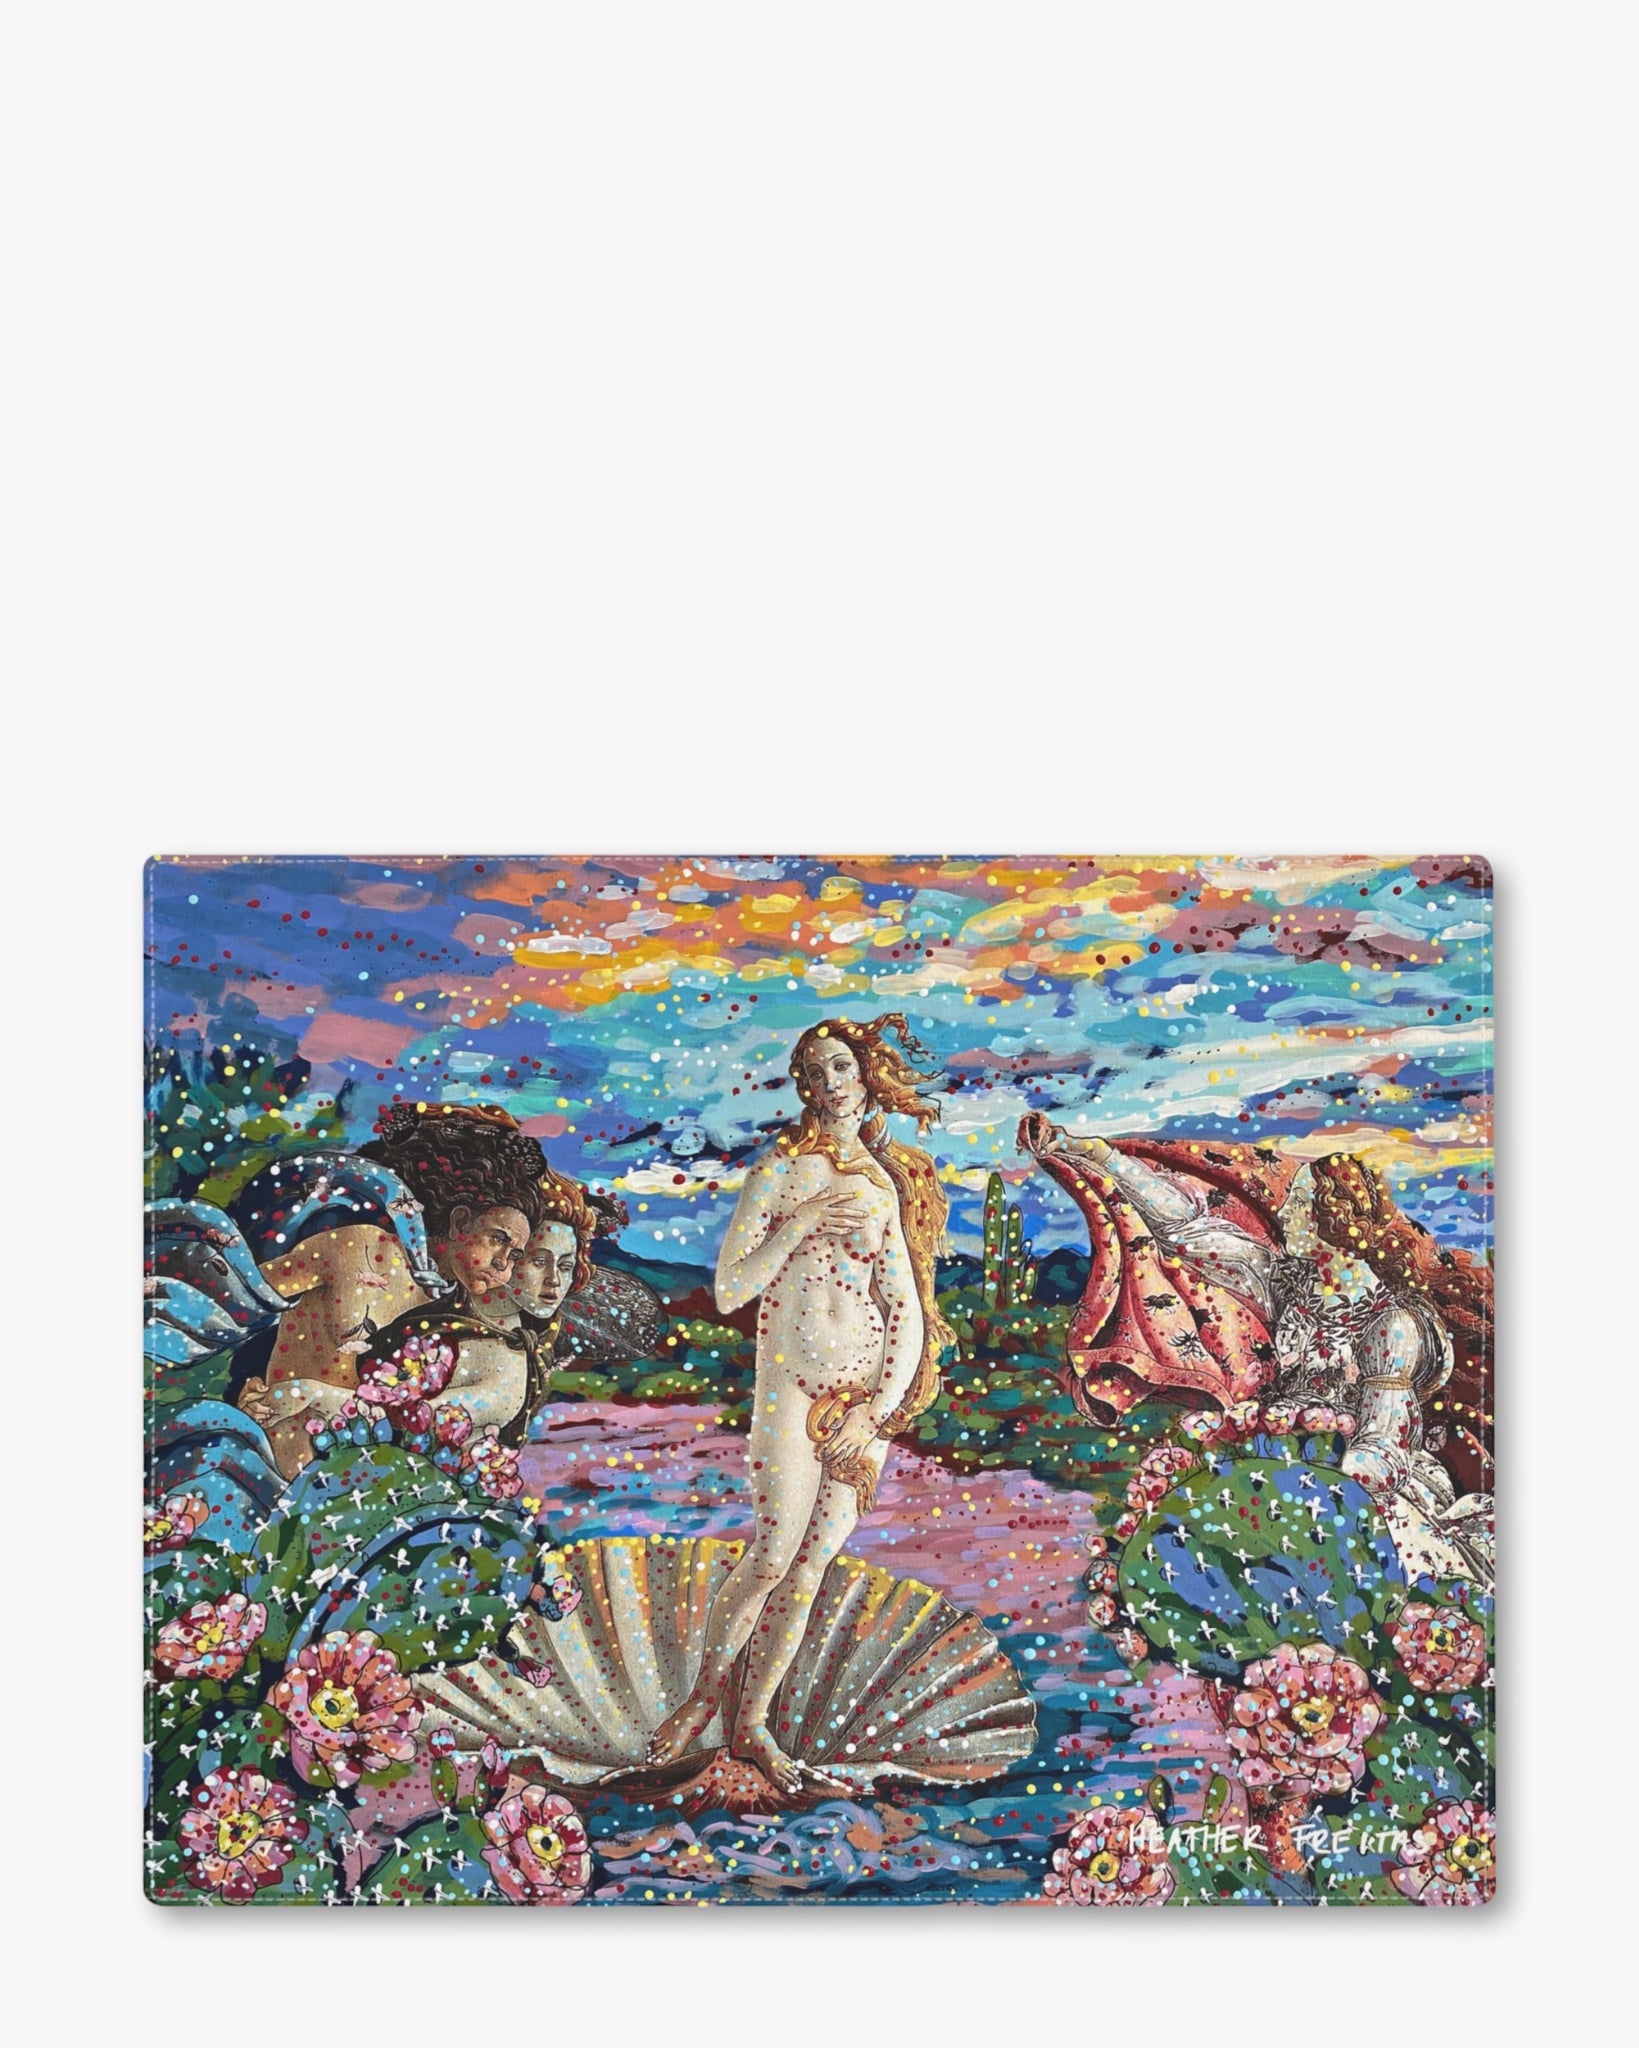 The Goddess Cotton Placemat